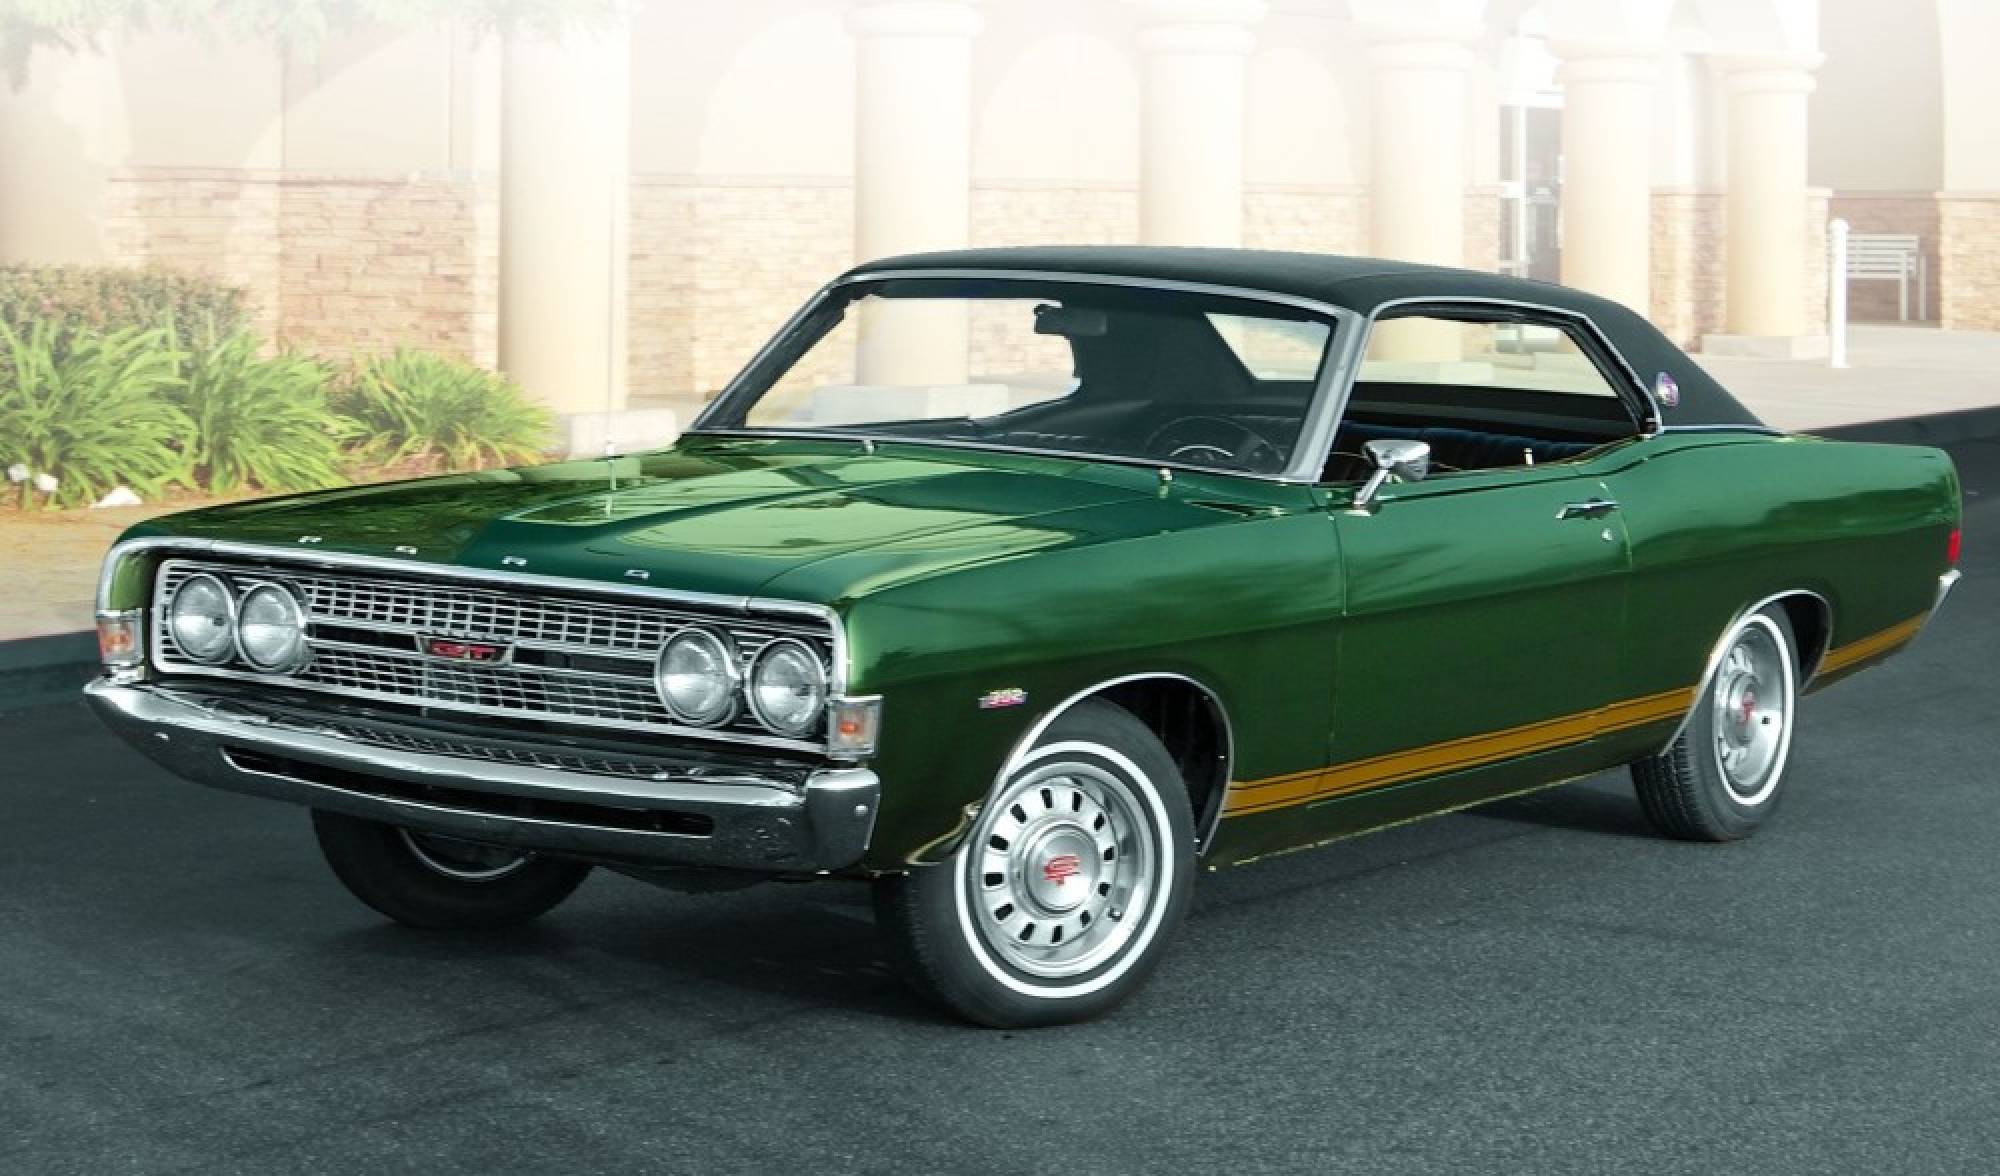 HQ Ford Torino Wallpapers | File 206.16Kb